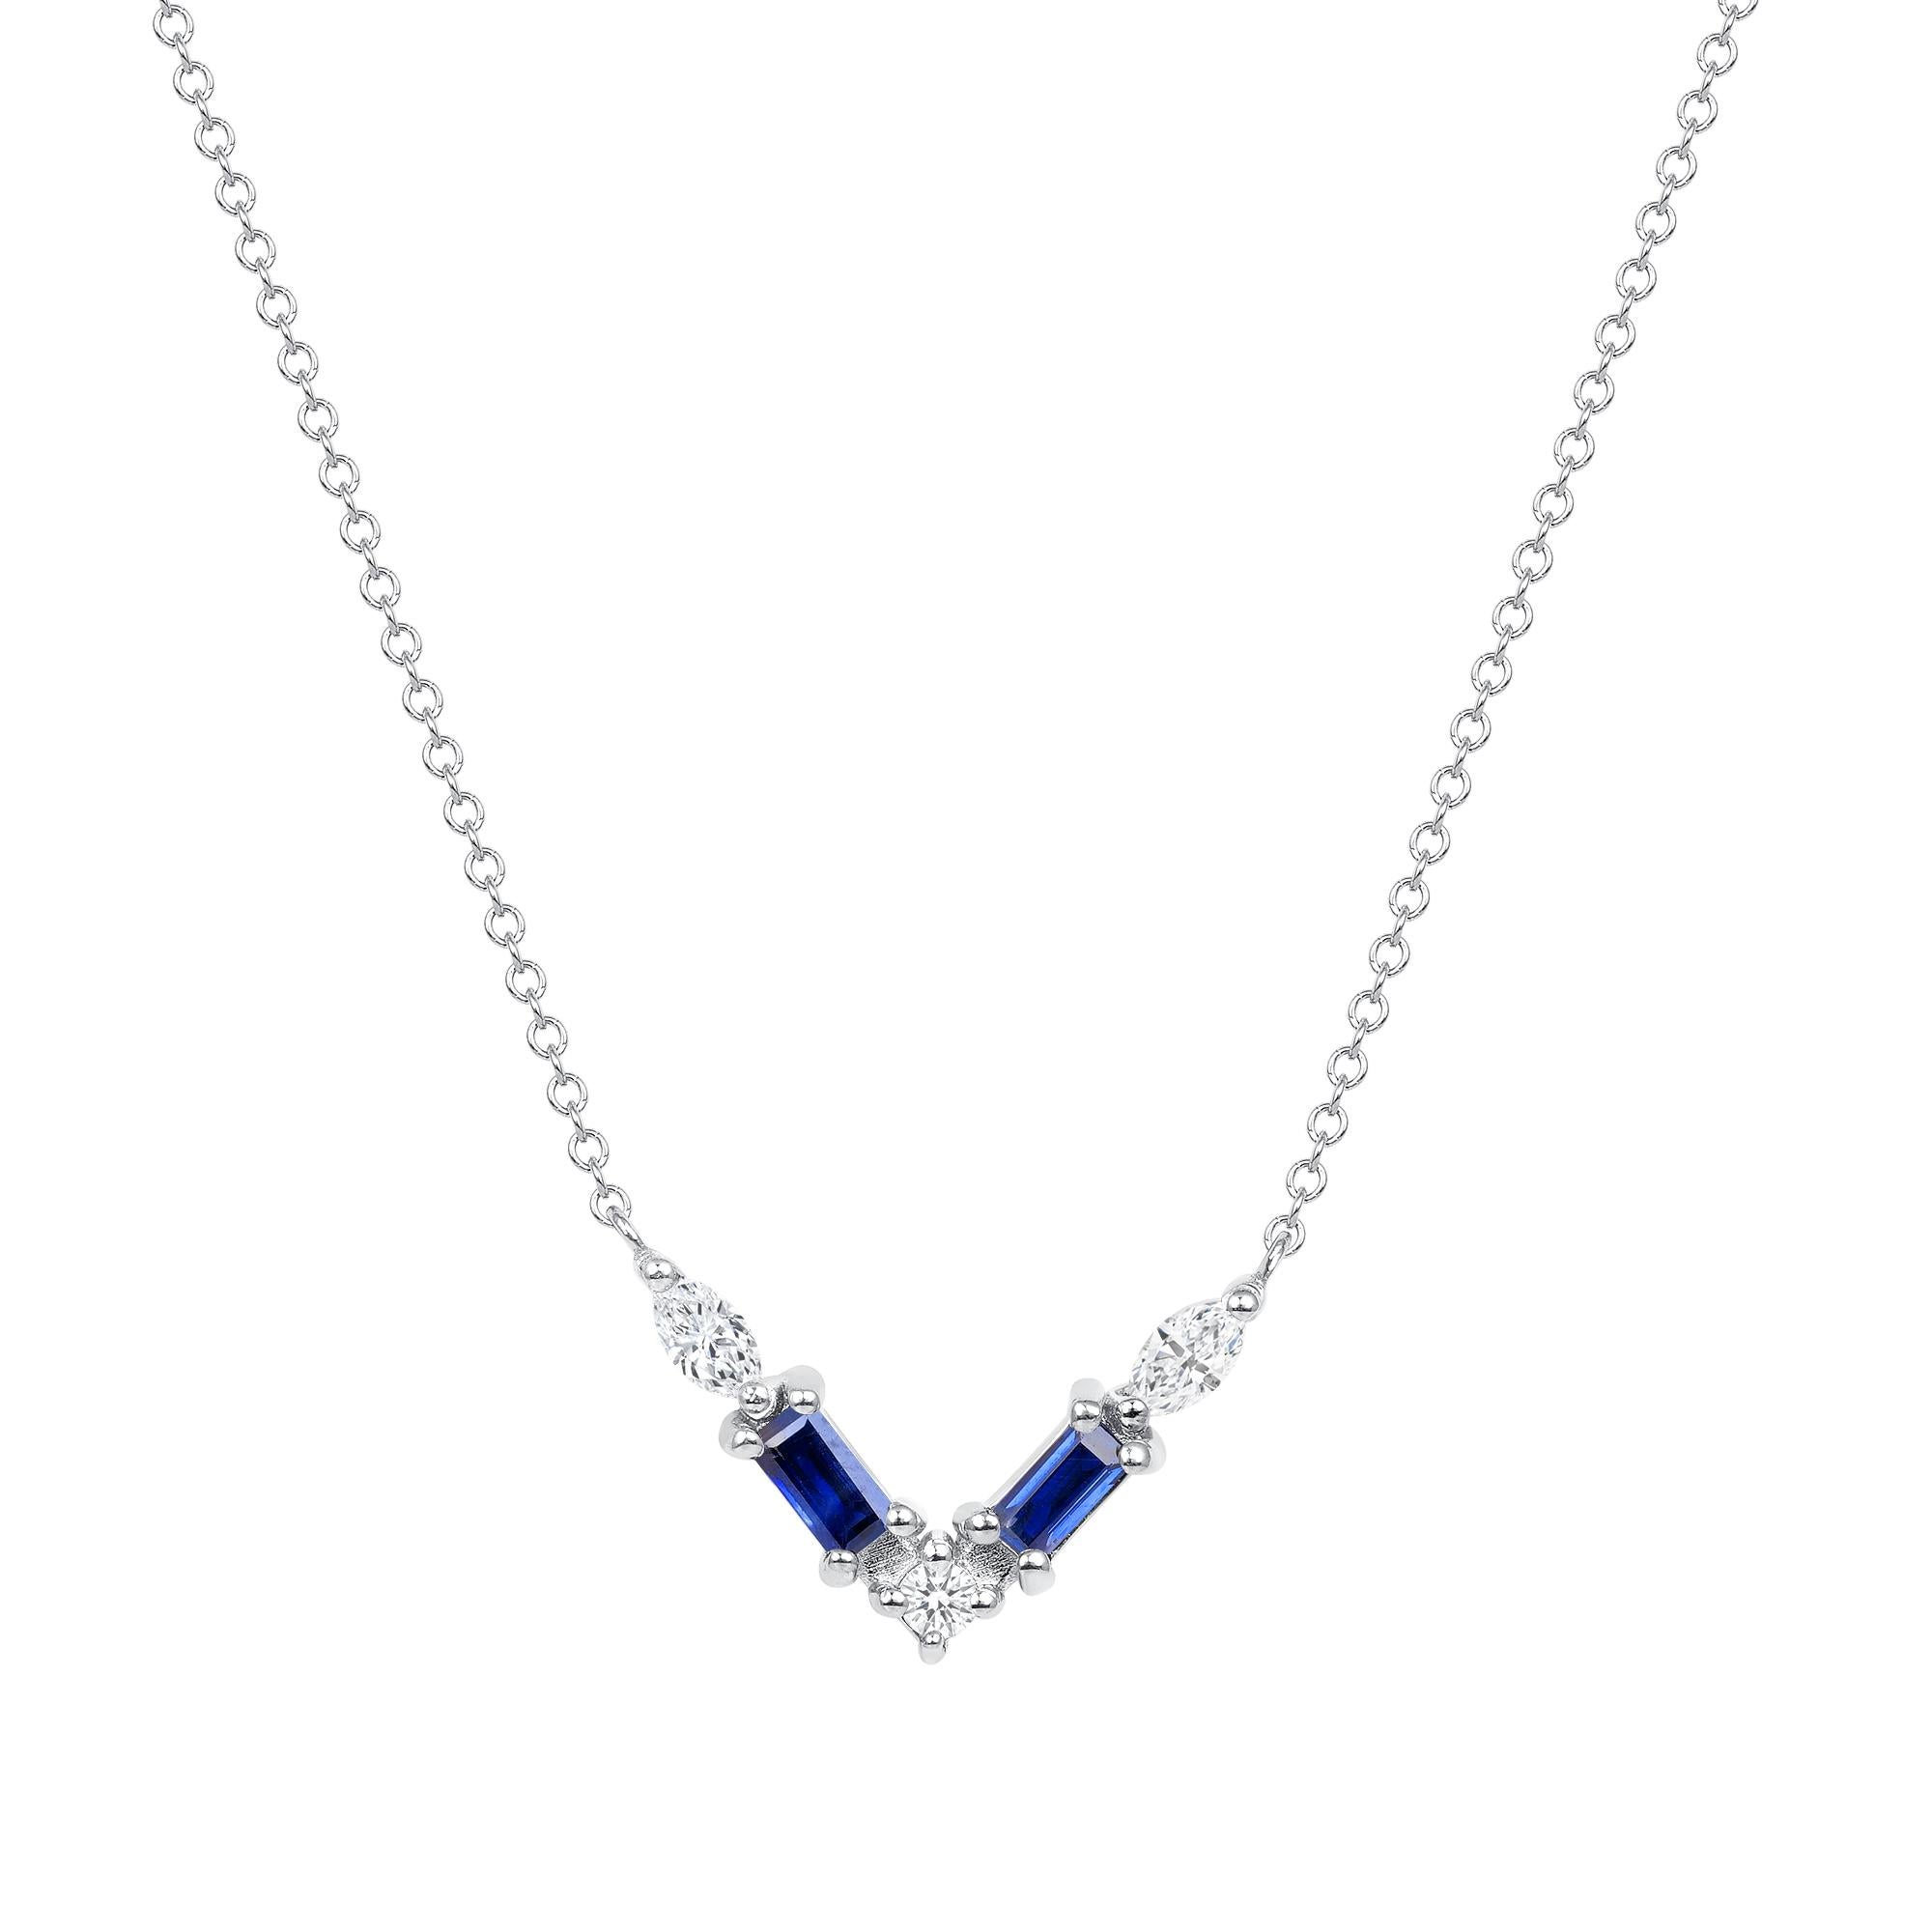 Crafted in 14K gold, this necklace features a thoughtfully arranged collection of blue sapphires and diamond pavé, elegantly set along a V-shaped plane. Crafted in 14K yellow gold, it exudes delicacy and emotion, showcasing a captivating color